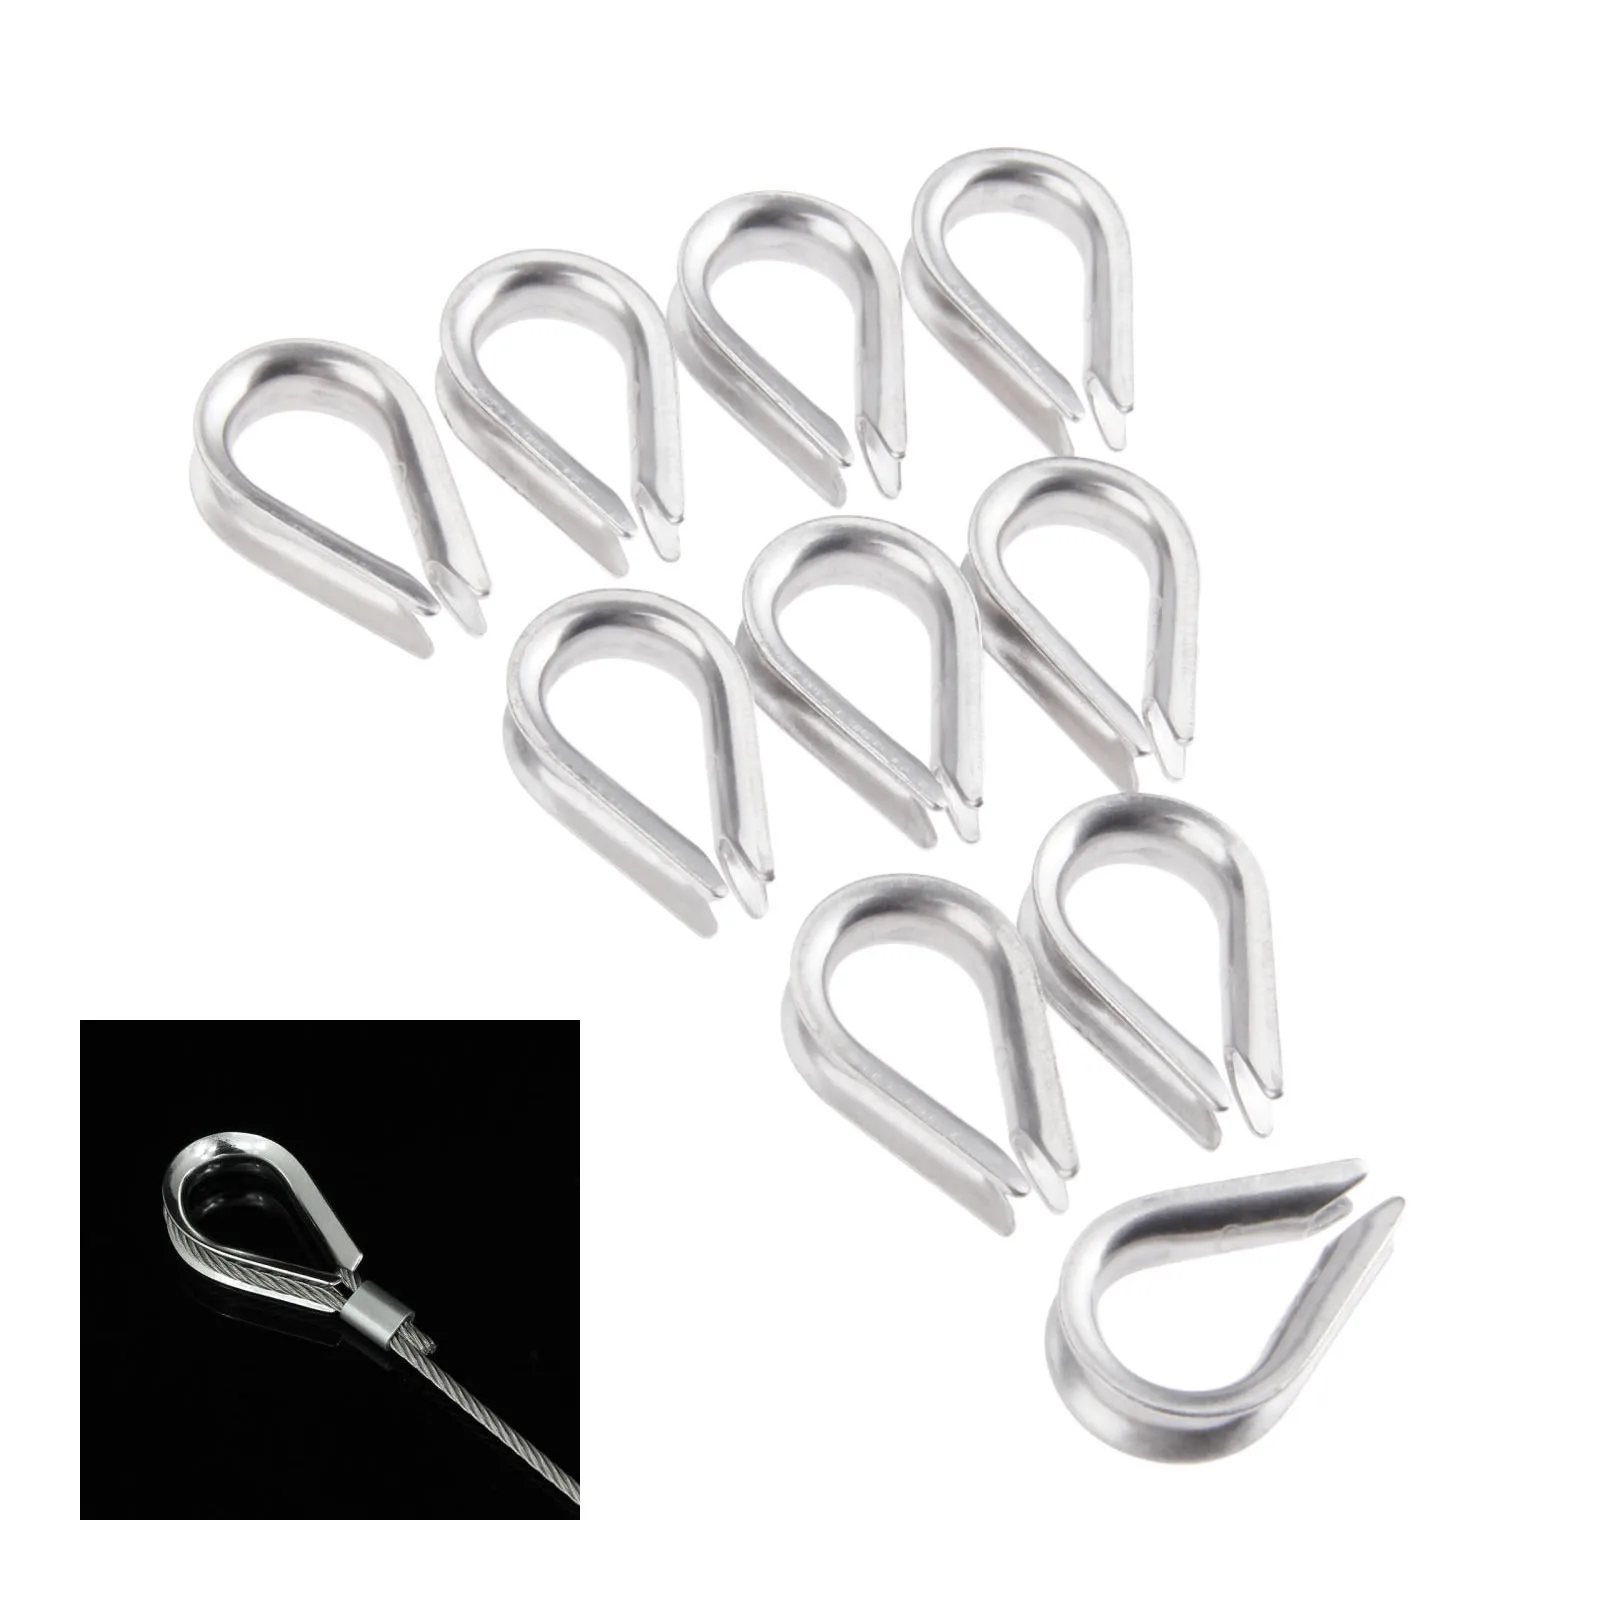 5 pieces Stainless Steel 316 Rope Thimble 8mm for rope size 5//16/" Marine Grade